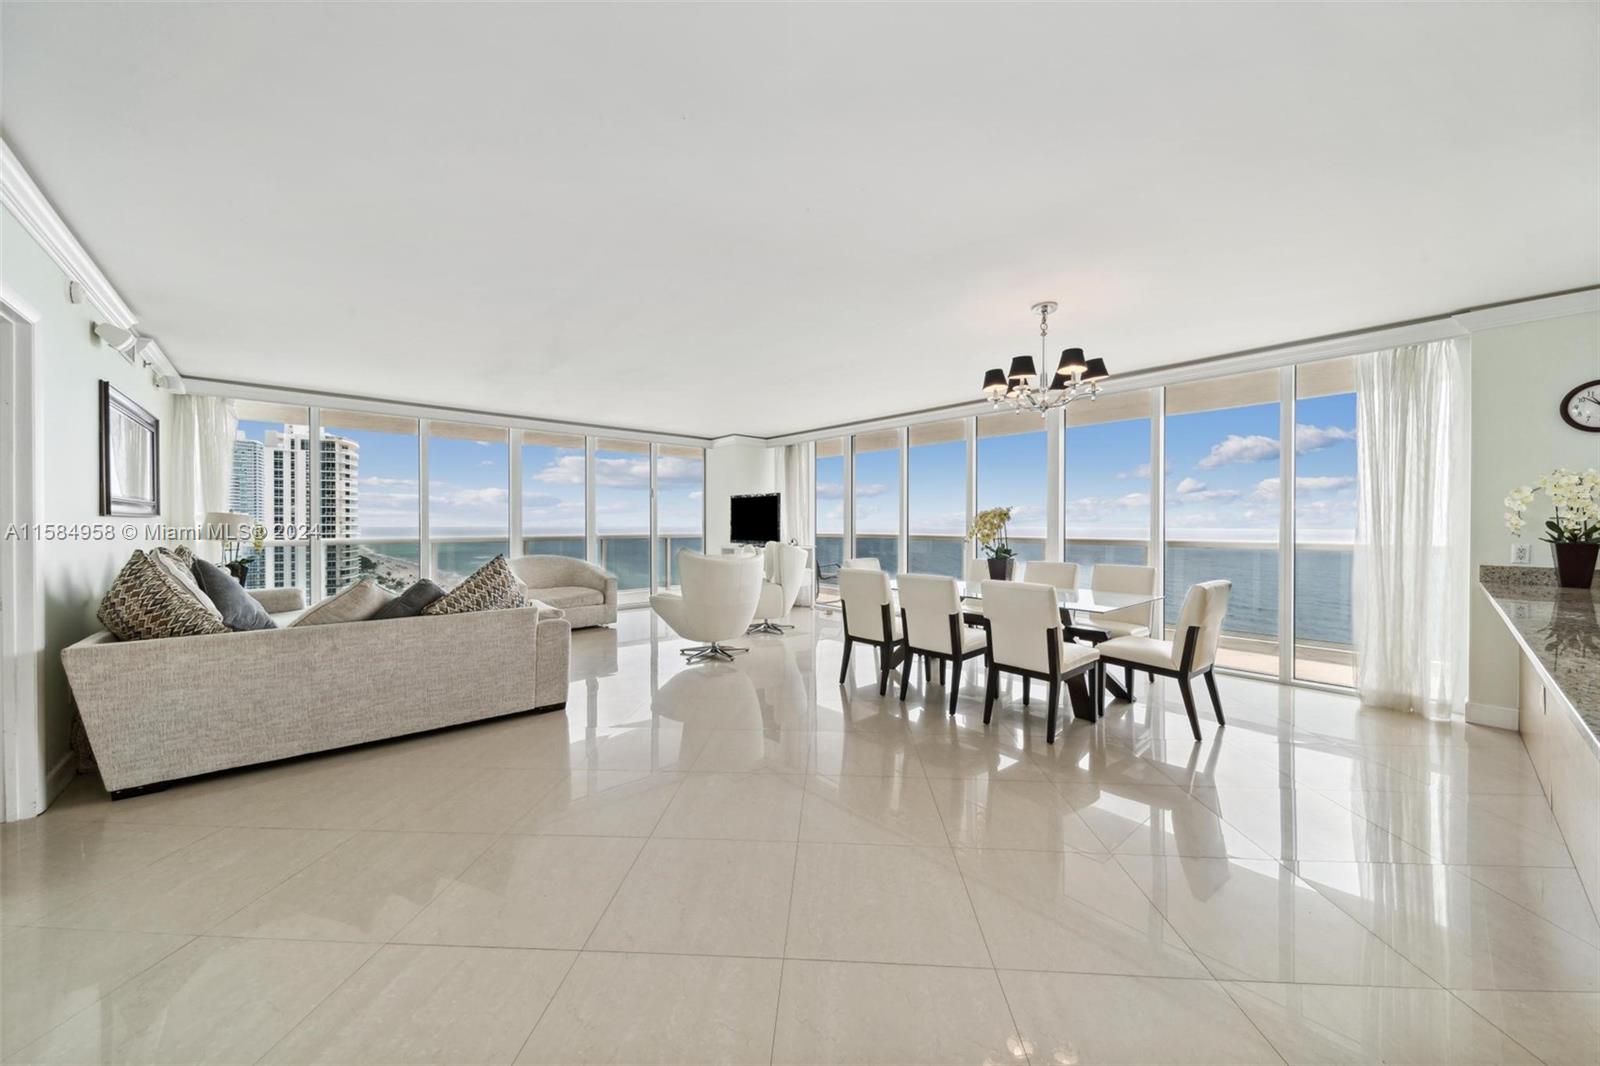 Truly Unique North-East corner unit with Breathtaking direct Ocean and Intracoastal views from this 17th floor. 2,065 sq. ft. plus 565 sq. ft. wraparound balcony. 3 bed/3 baths. Marble floors throughout, European style kitchen with Gorgeous granite counter tops and kitchen-aid appliances. Jacuzzi & separate shower in master bath. This is a 5 star resort like amenities such as magnificent lobby entrance, full time concierge, security, 24-hour valet, multi-level covered parking, 5 heated pools, 50.000 sq. ft. spa, and fitness center overlooking the ocean. One parking assigned +1 free valet. Easy to show. Rental policy is minimum 30 days, 12 times per year.